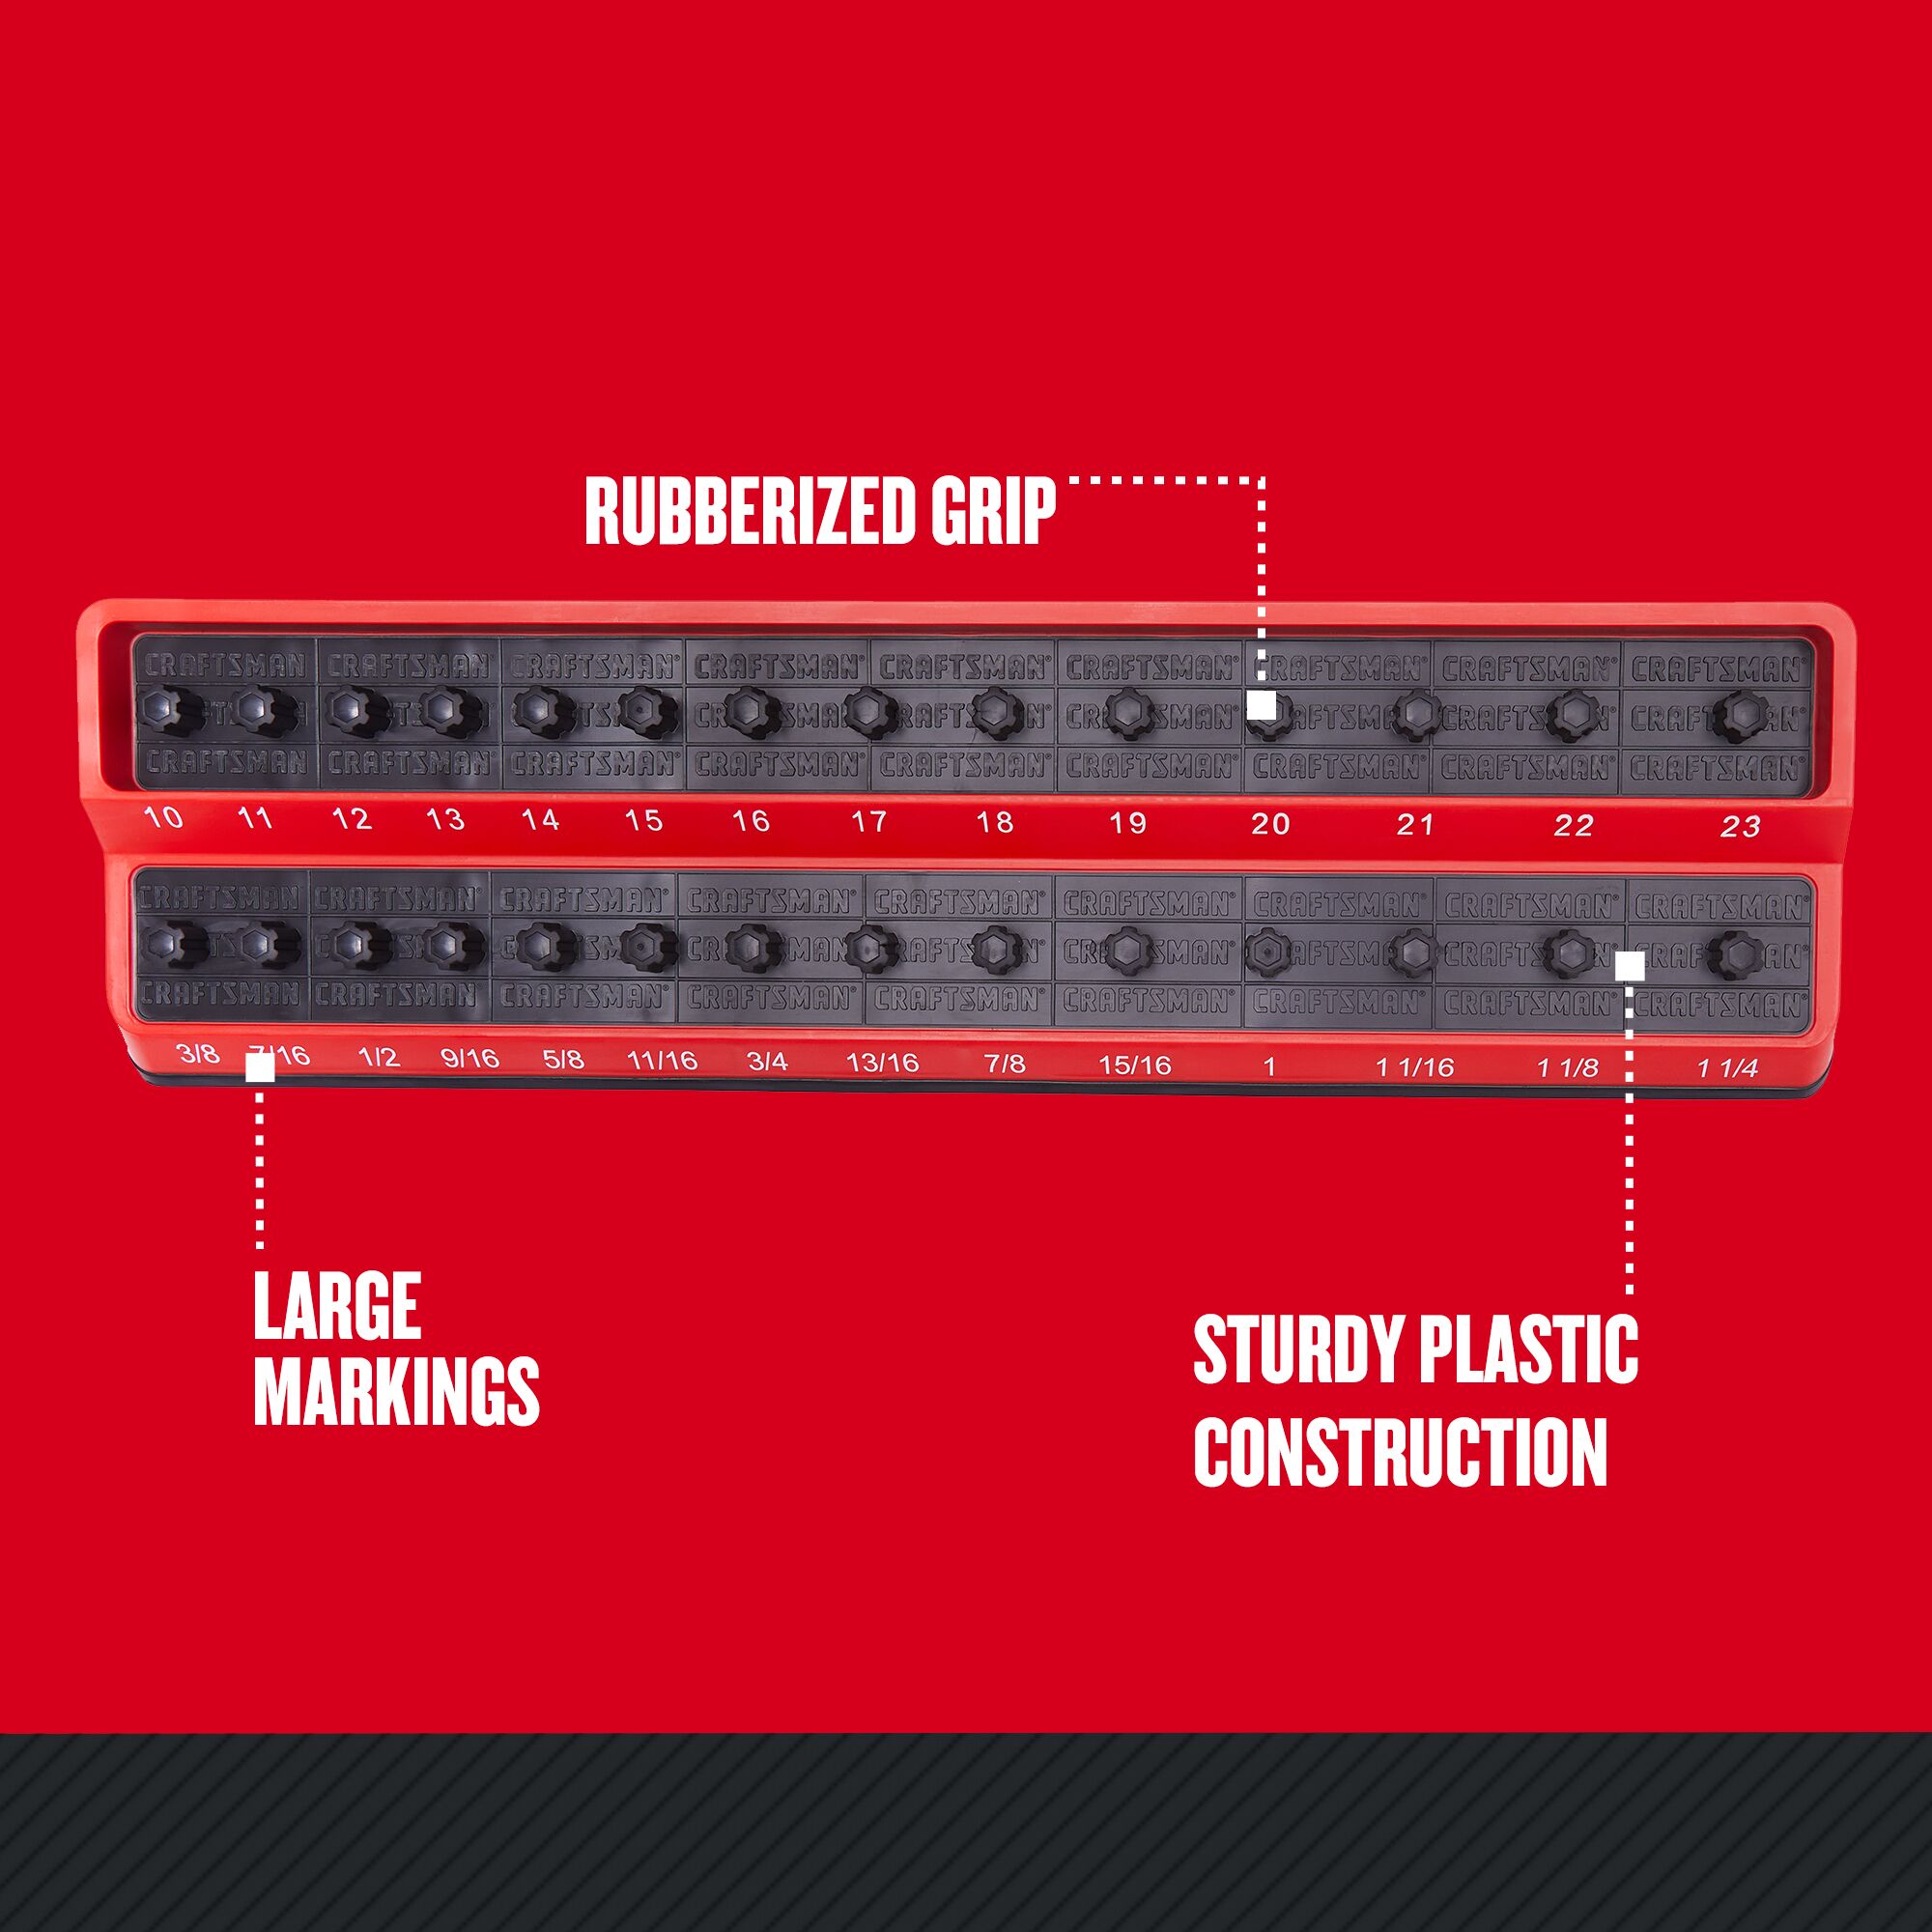 Graphic of CRAFTSMAN Sockets highlighting product features